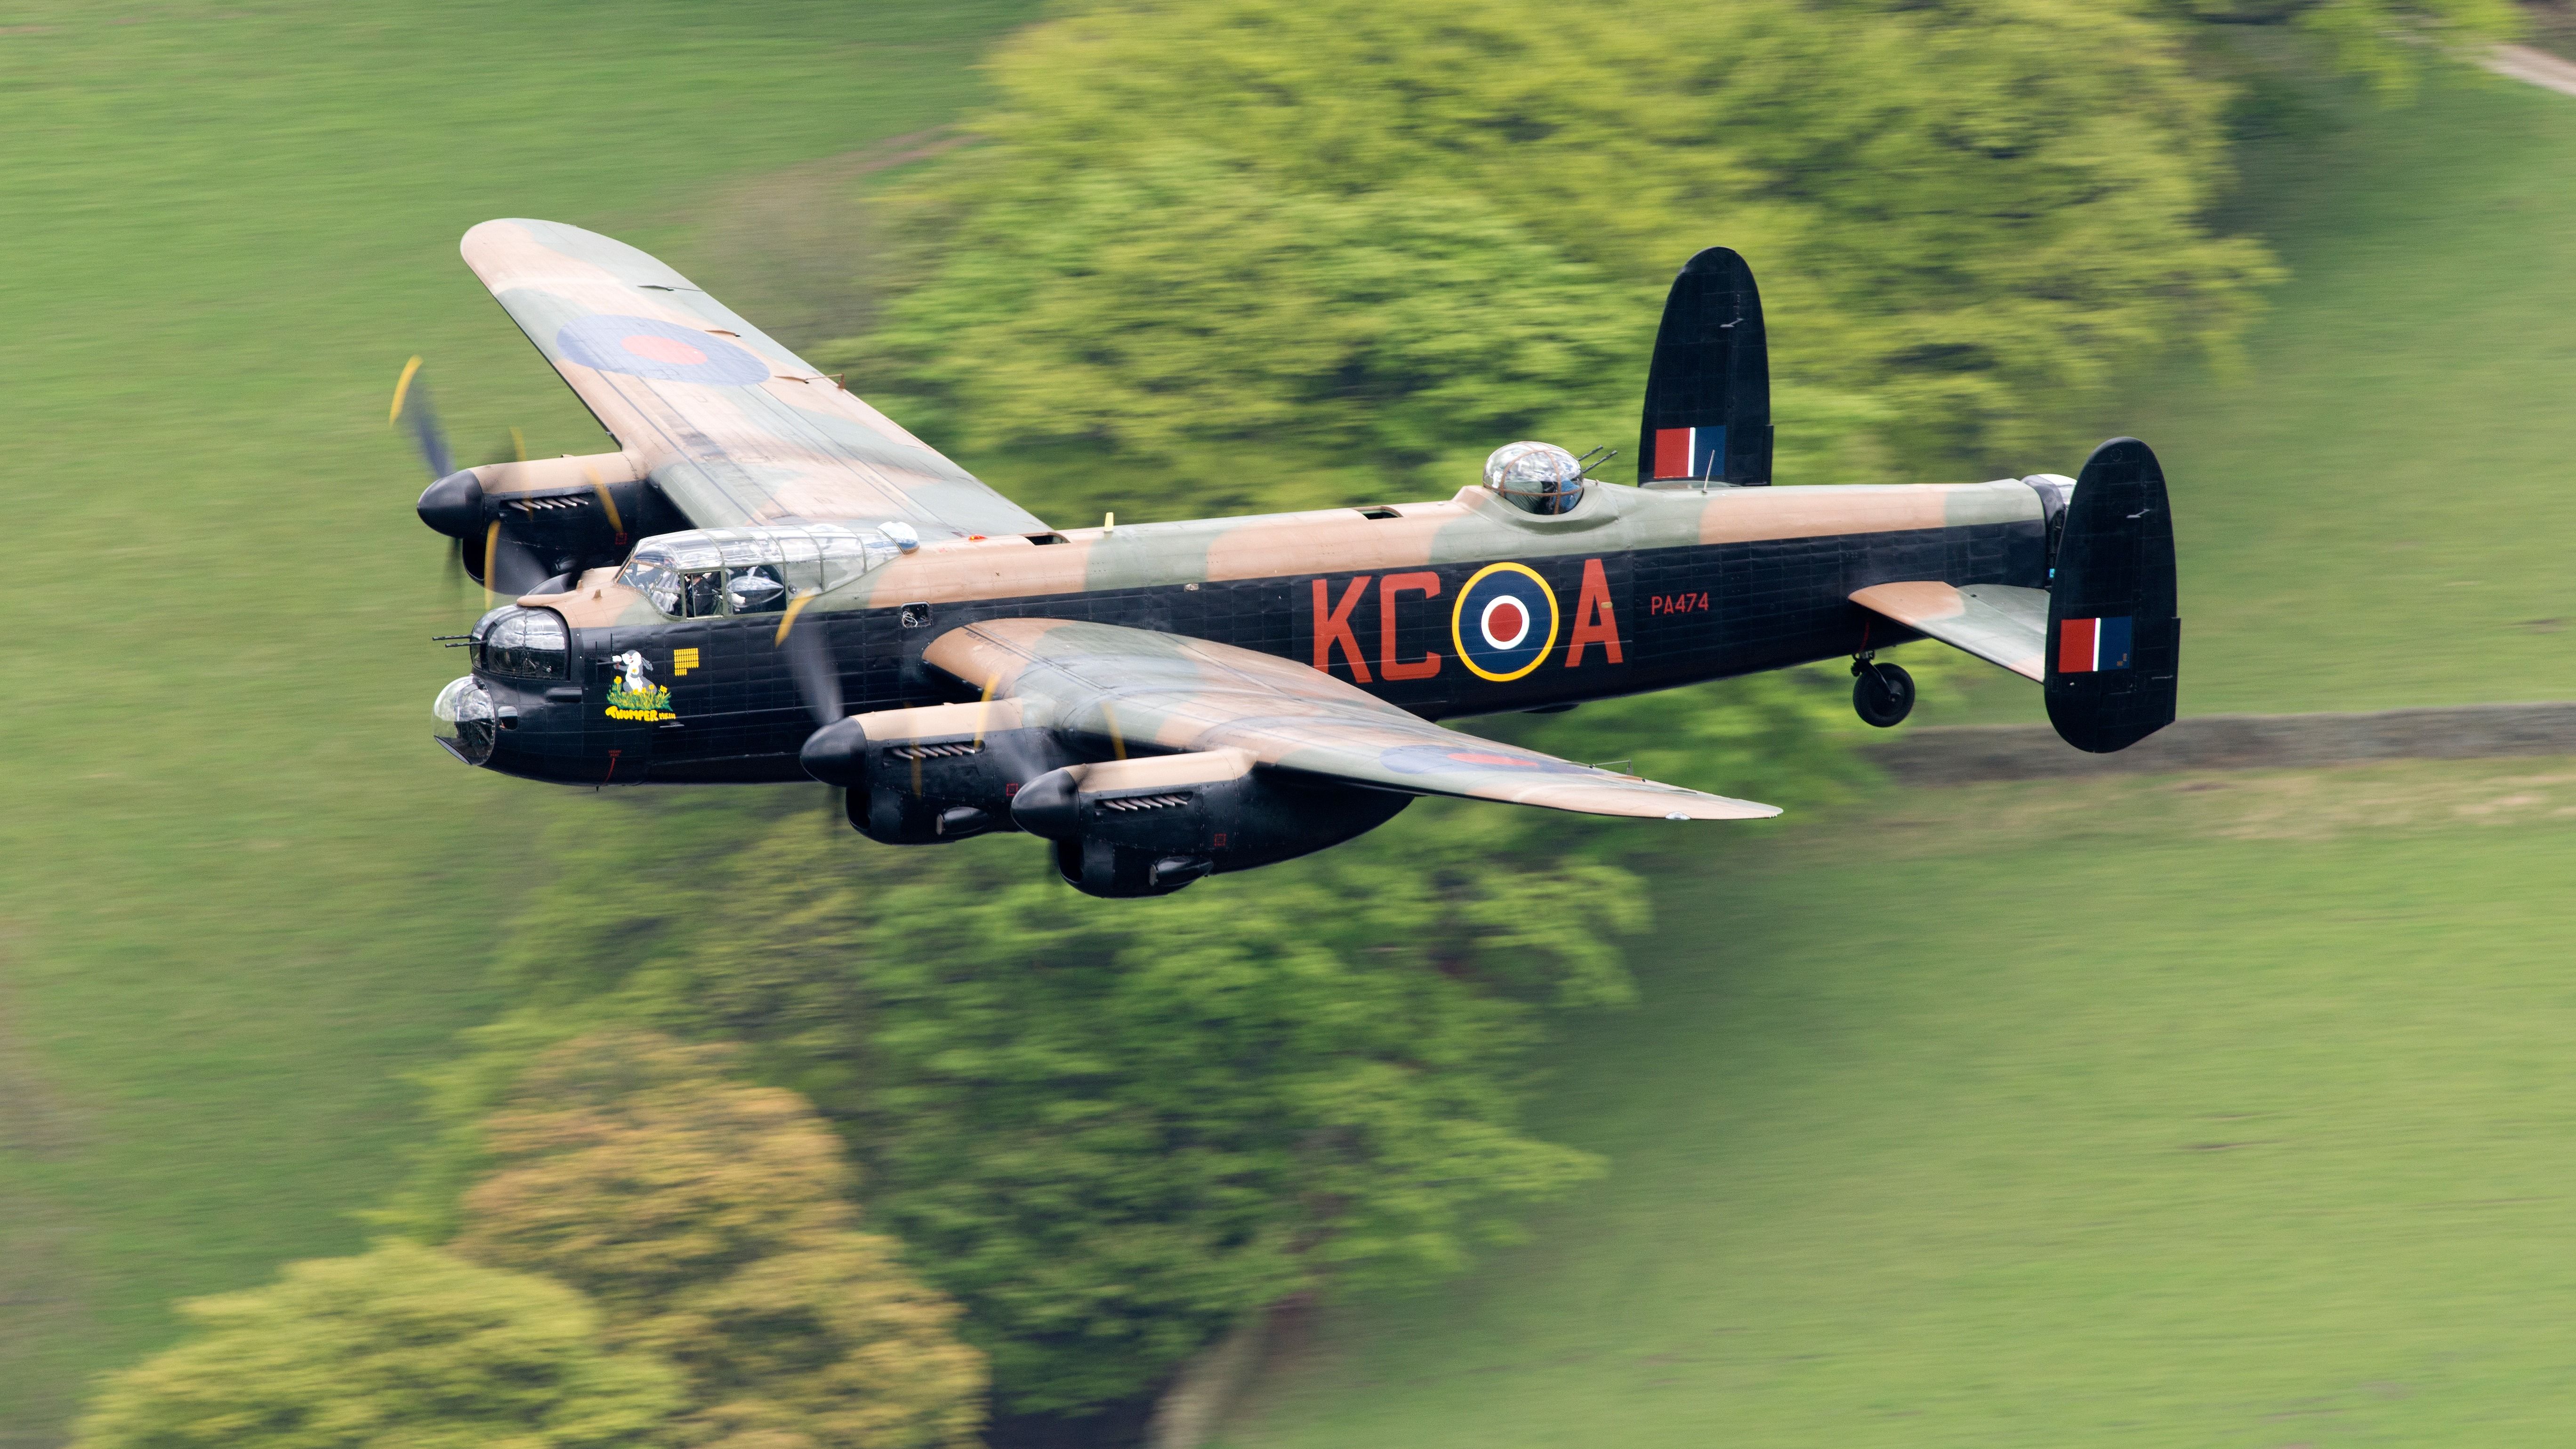 Why Was The Avro Lancaster Bomber So Profitable?